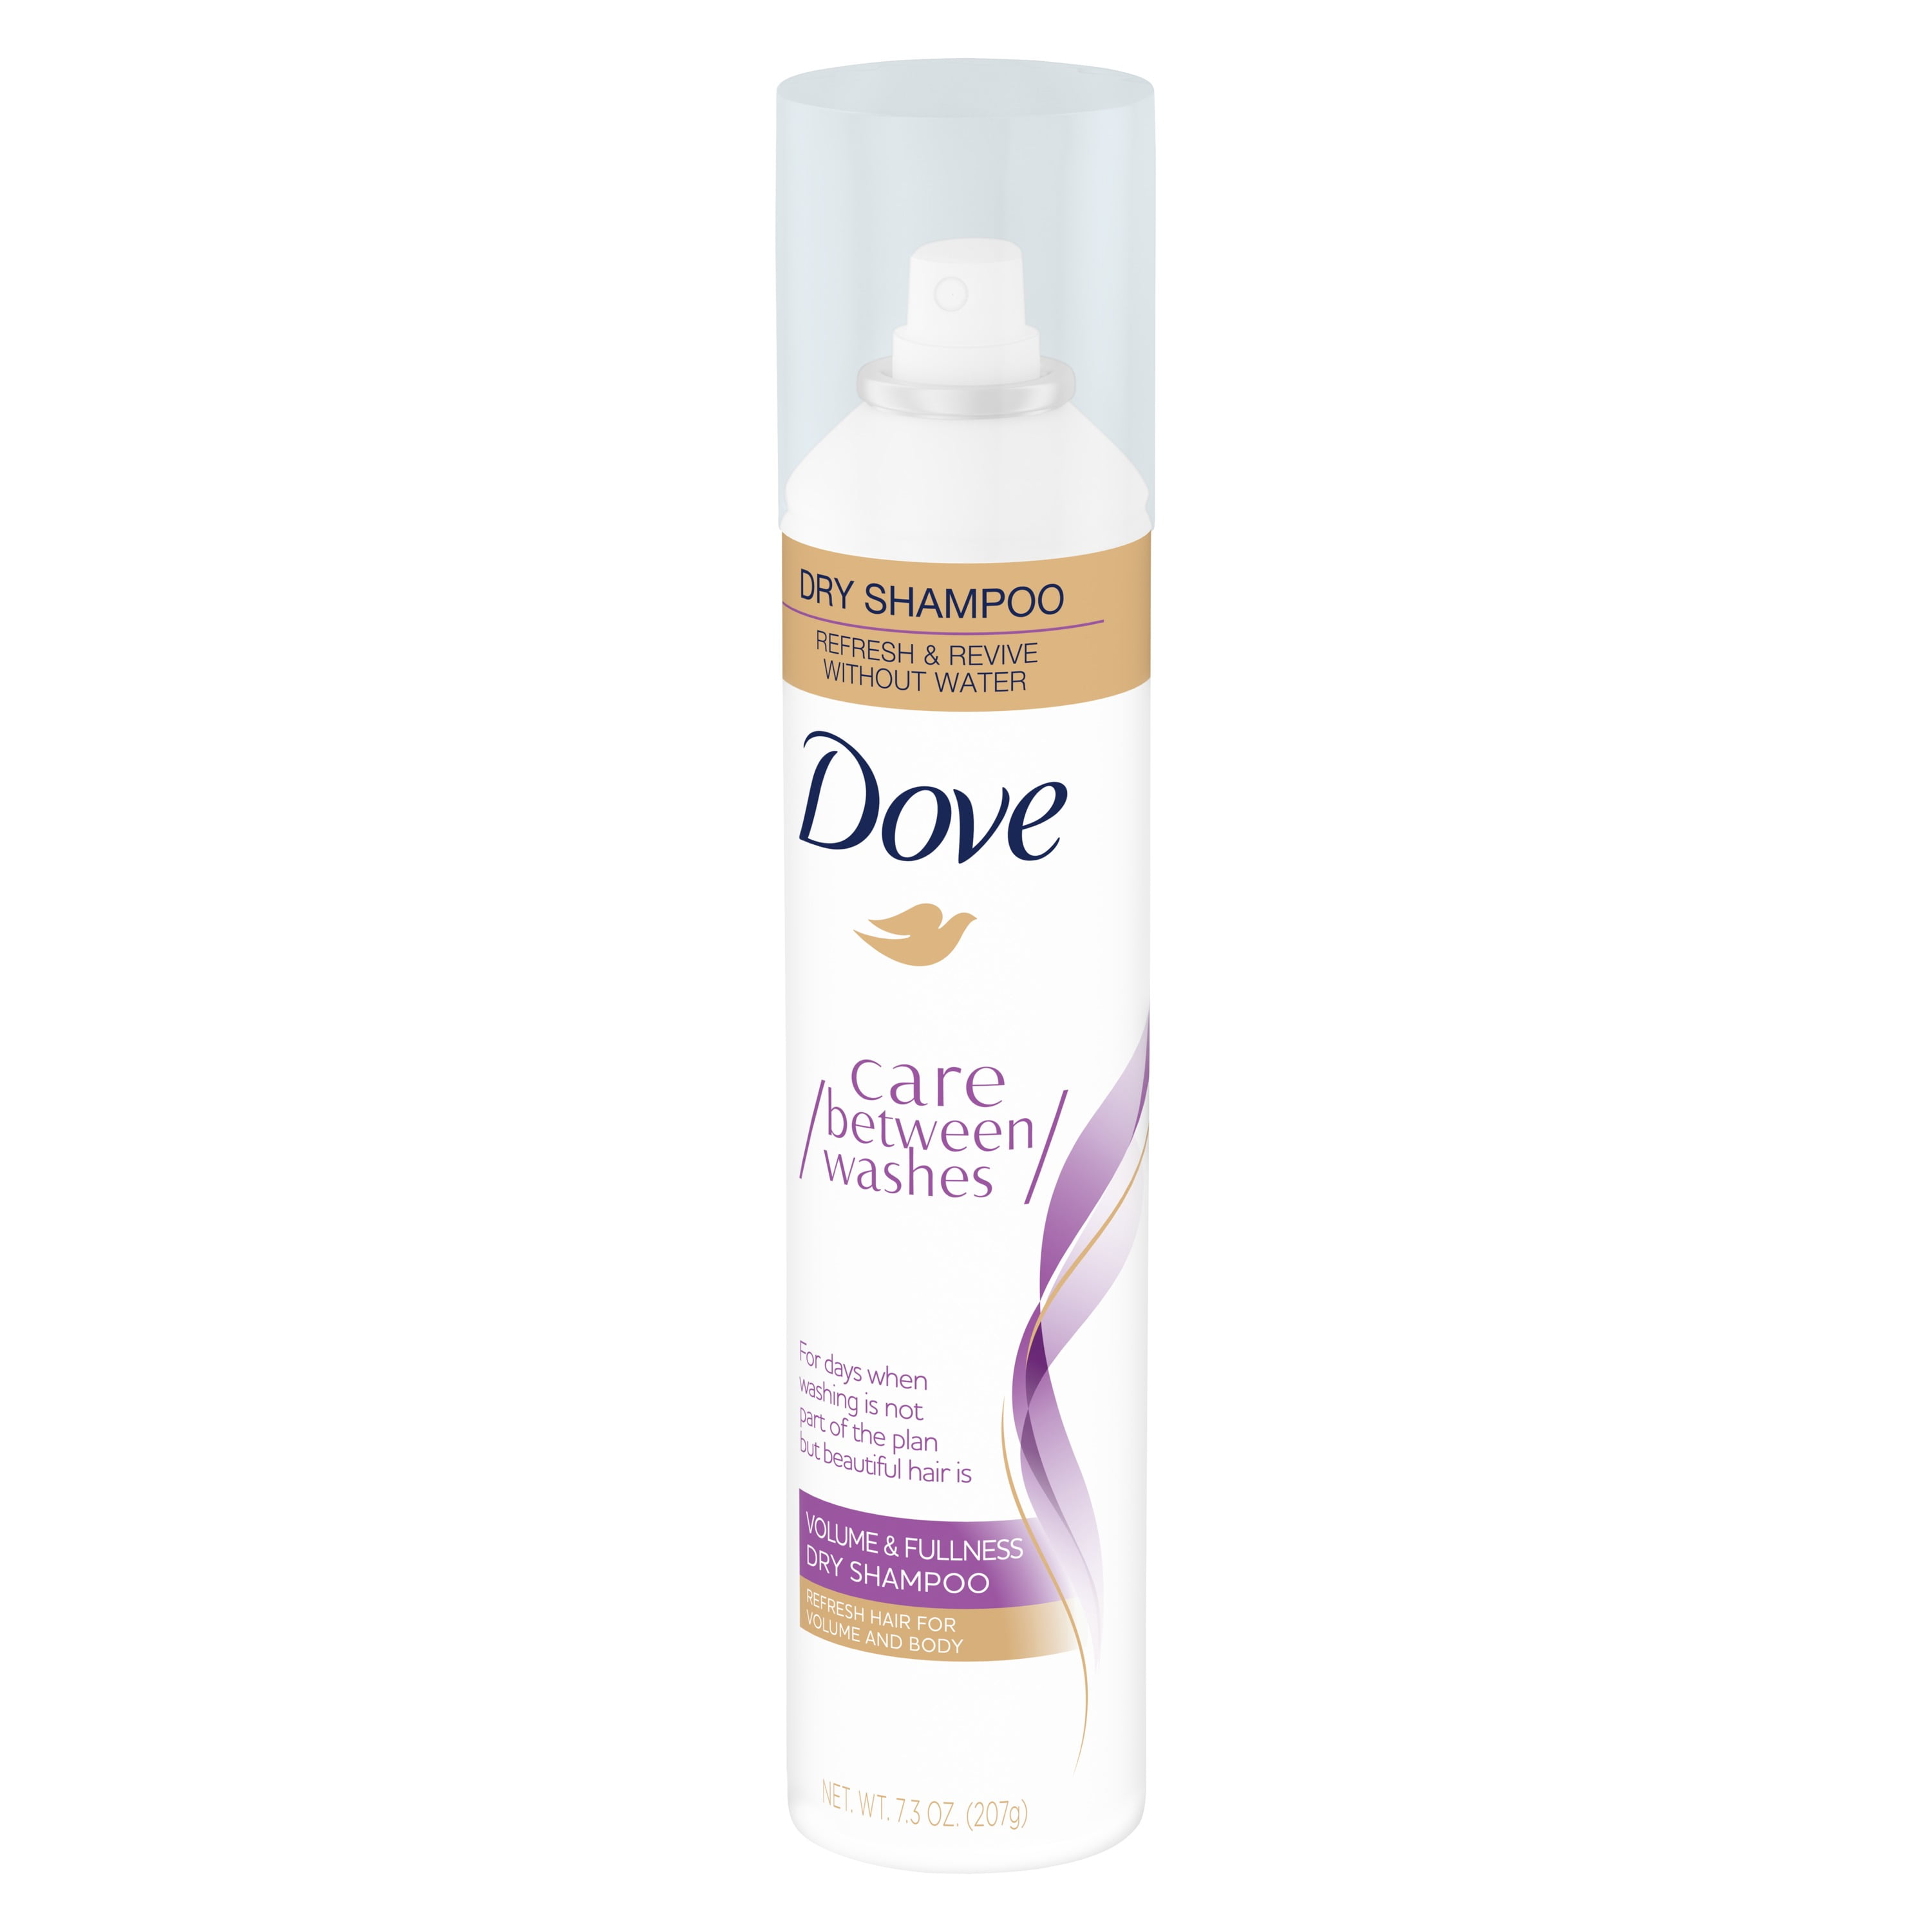 Dove Volumizing Dry Shampoo, Care Between Washes for All Hair Types,  oz  